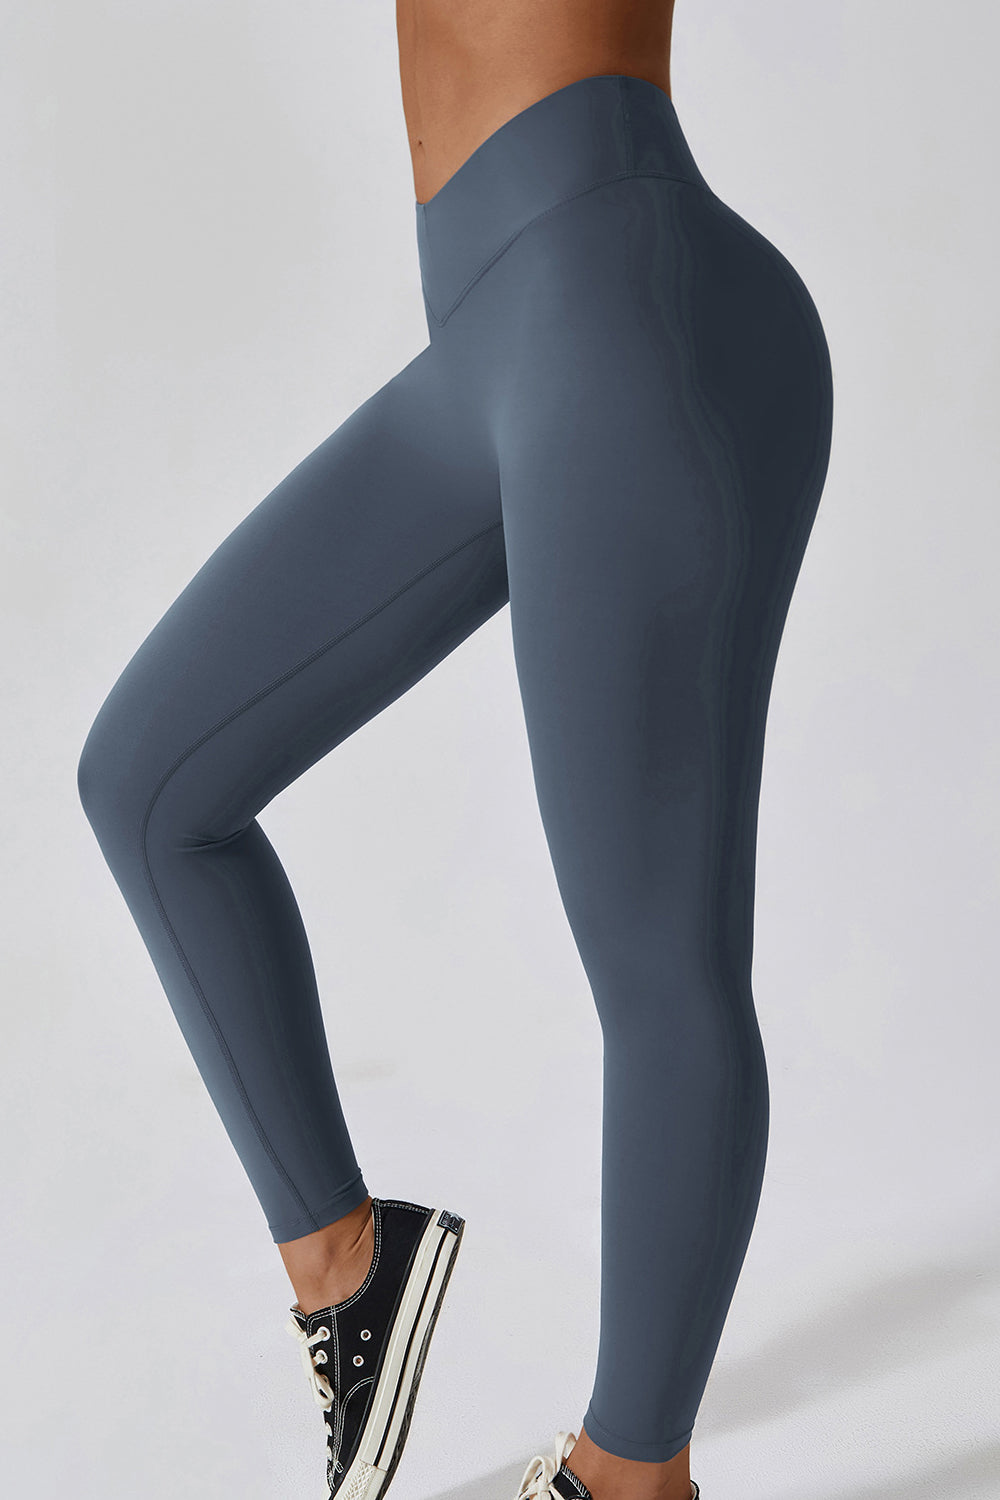 POSHOOT  AUTUMN OUTFITS    Slim Fit Wide Waistband Sports Leggings